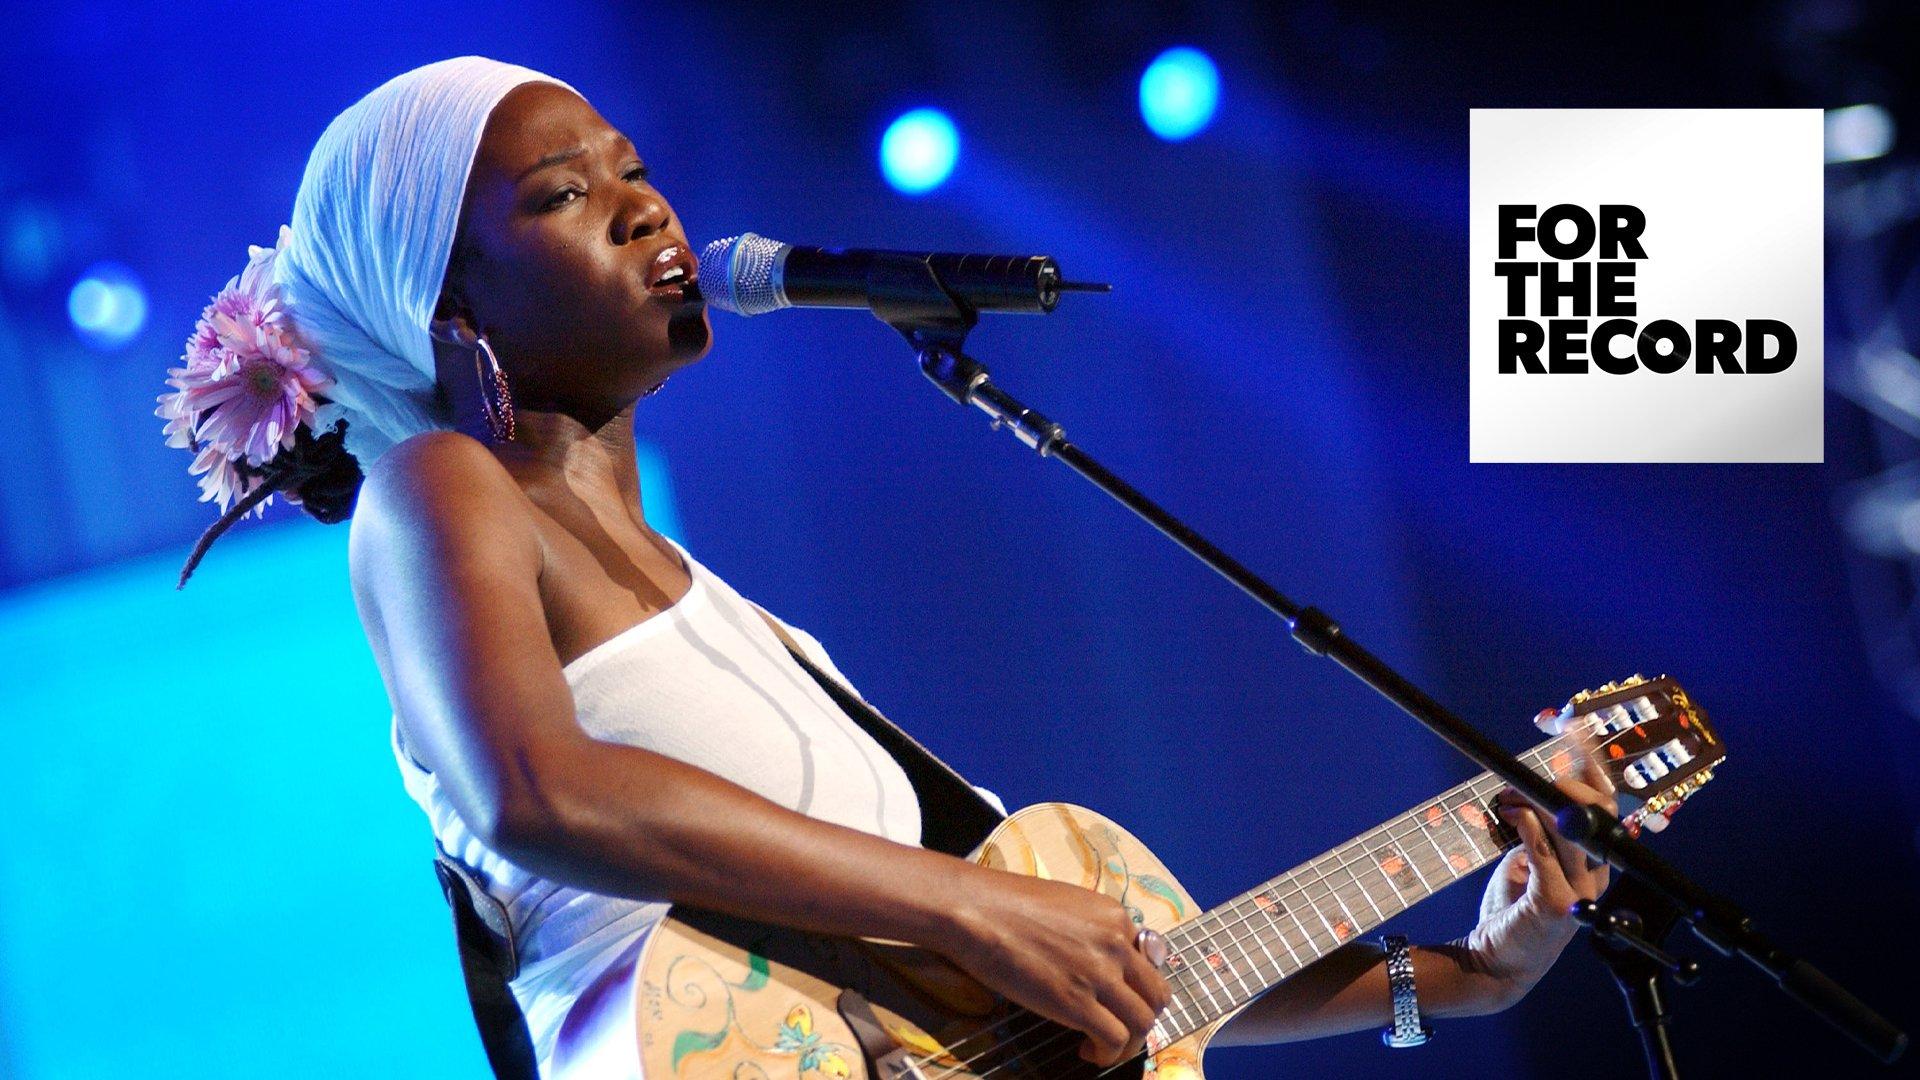 India.Arie For The Record Hero